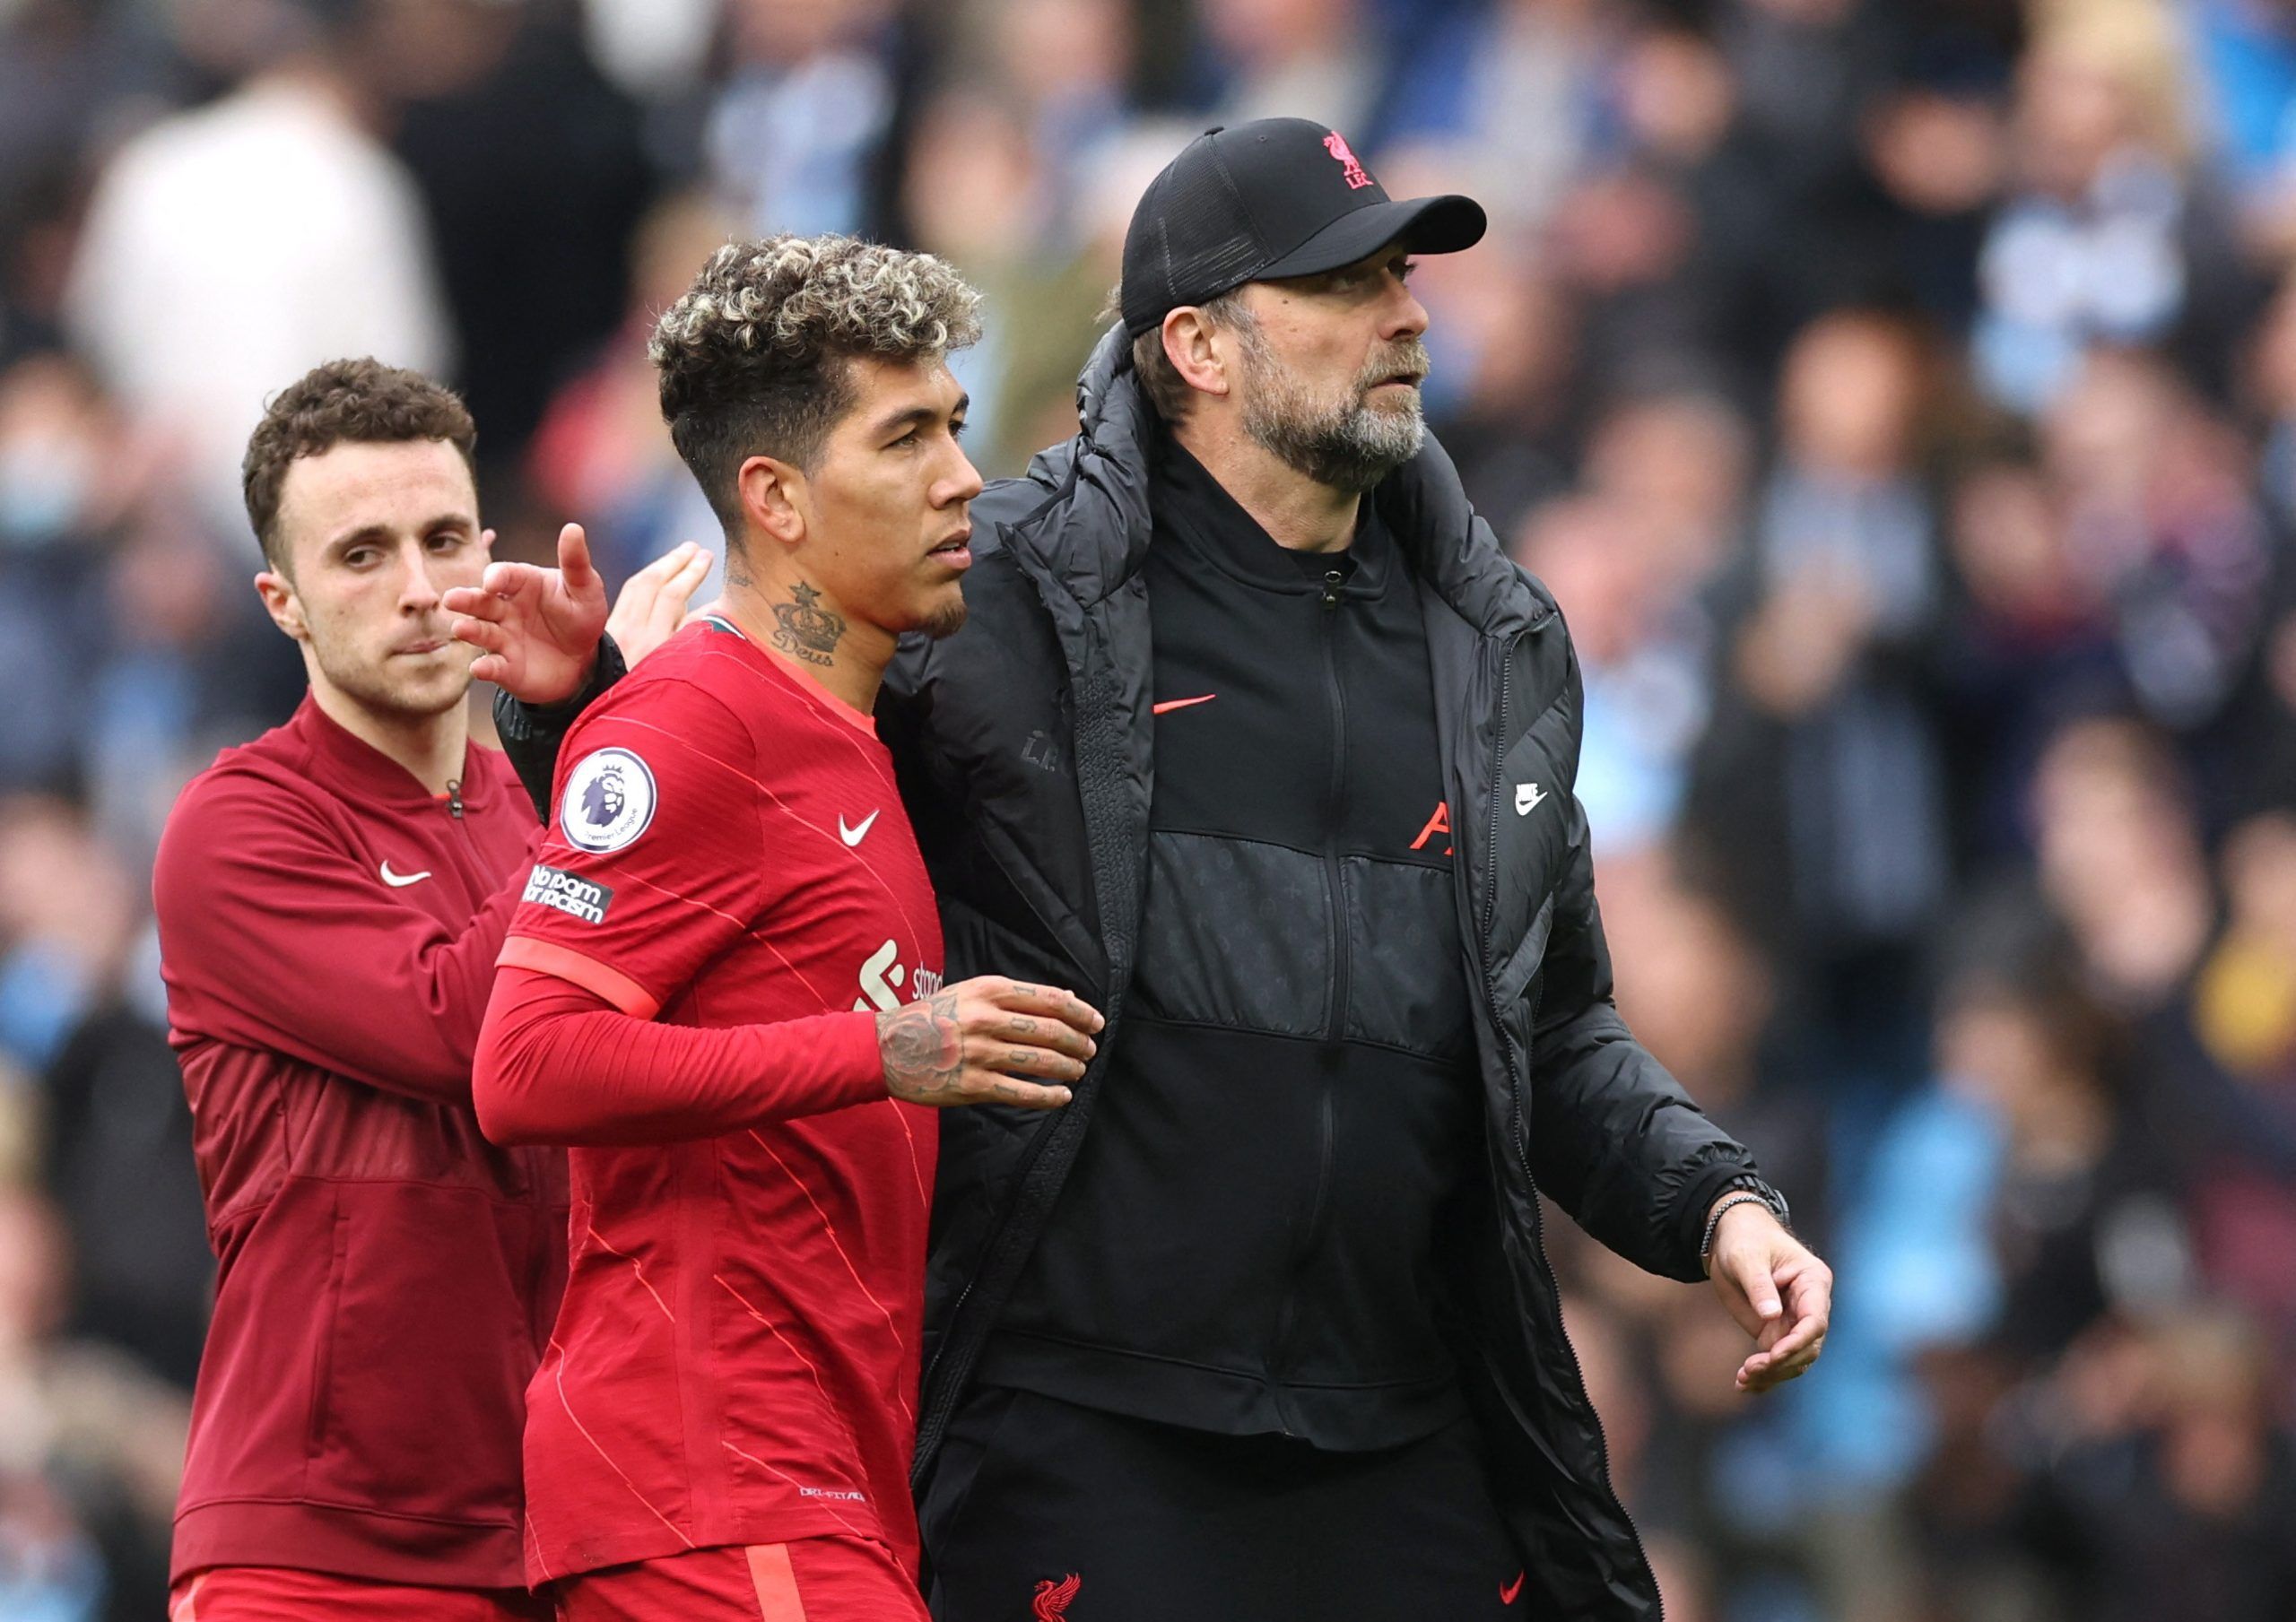 firmino-champions-league-injury-news-liverpool-villarreal-bayern-semi-final-manchester-citySoccer Football - Premier League - Manchester City v Liverpool - Etihad Stadium, Manchester, Britain - April 10, 2022 Liverpool manager Juergen Klopp with Roberto Firmino and Diogo Jota after the match Action Images via Reuters/Carl Recine EDITORIAL USE ONLY. No use with unauthorized audio, video, data, fixture lists, club/league logos or 'live' services. Online in-match use limited to 75 images, no video 